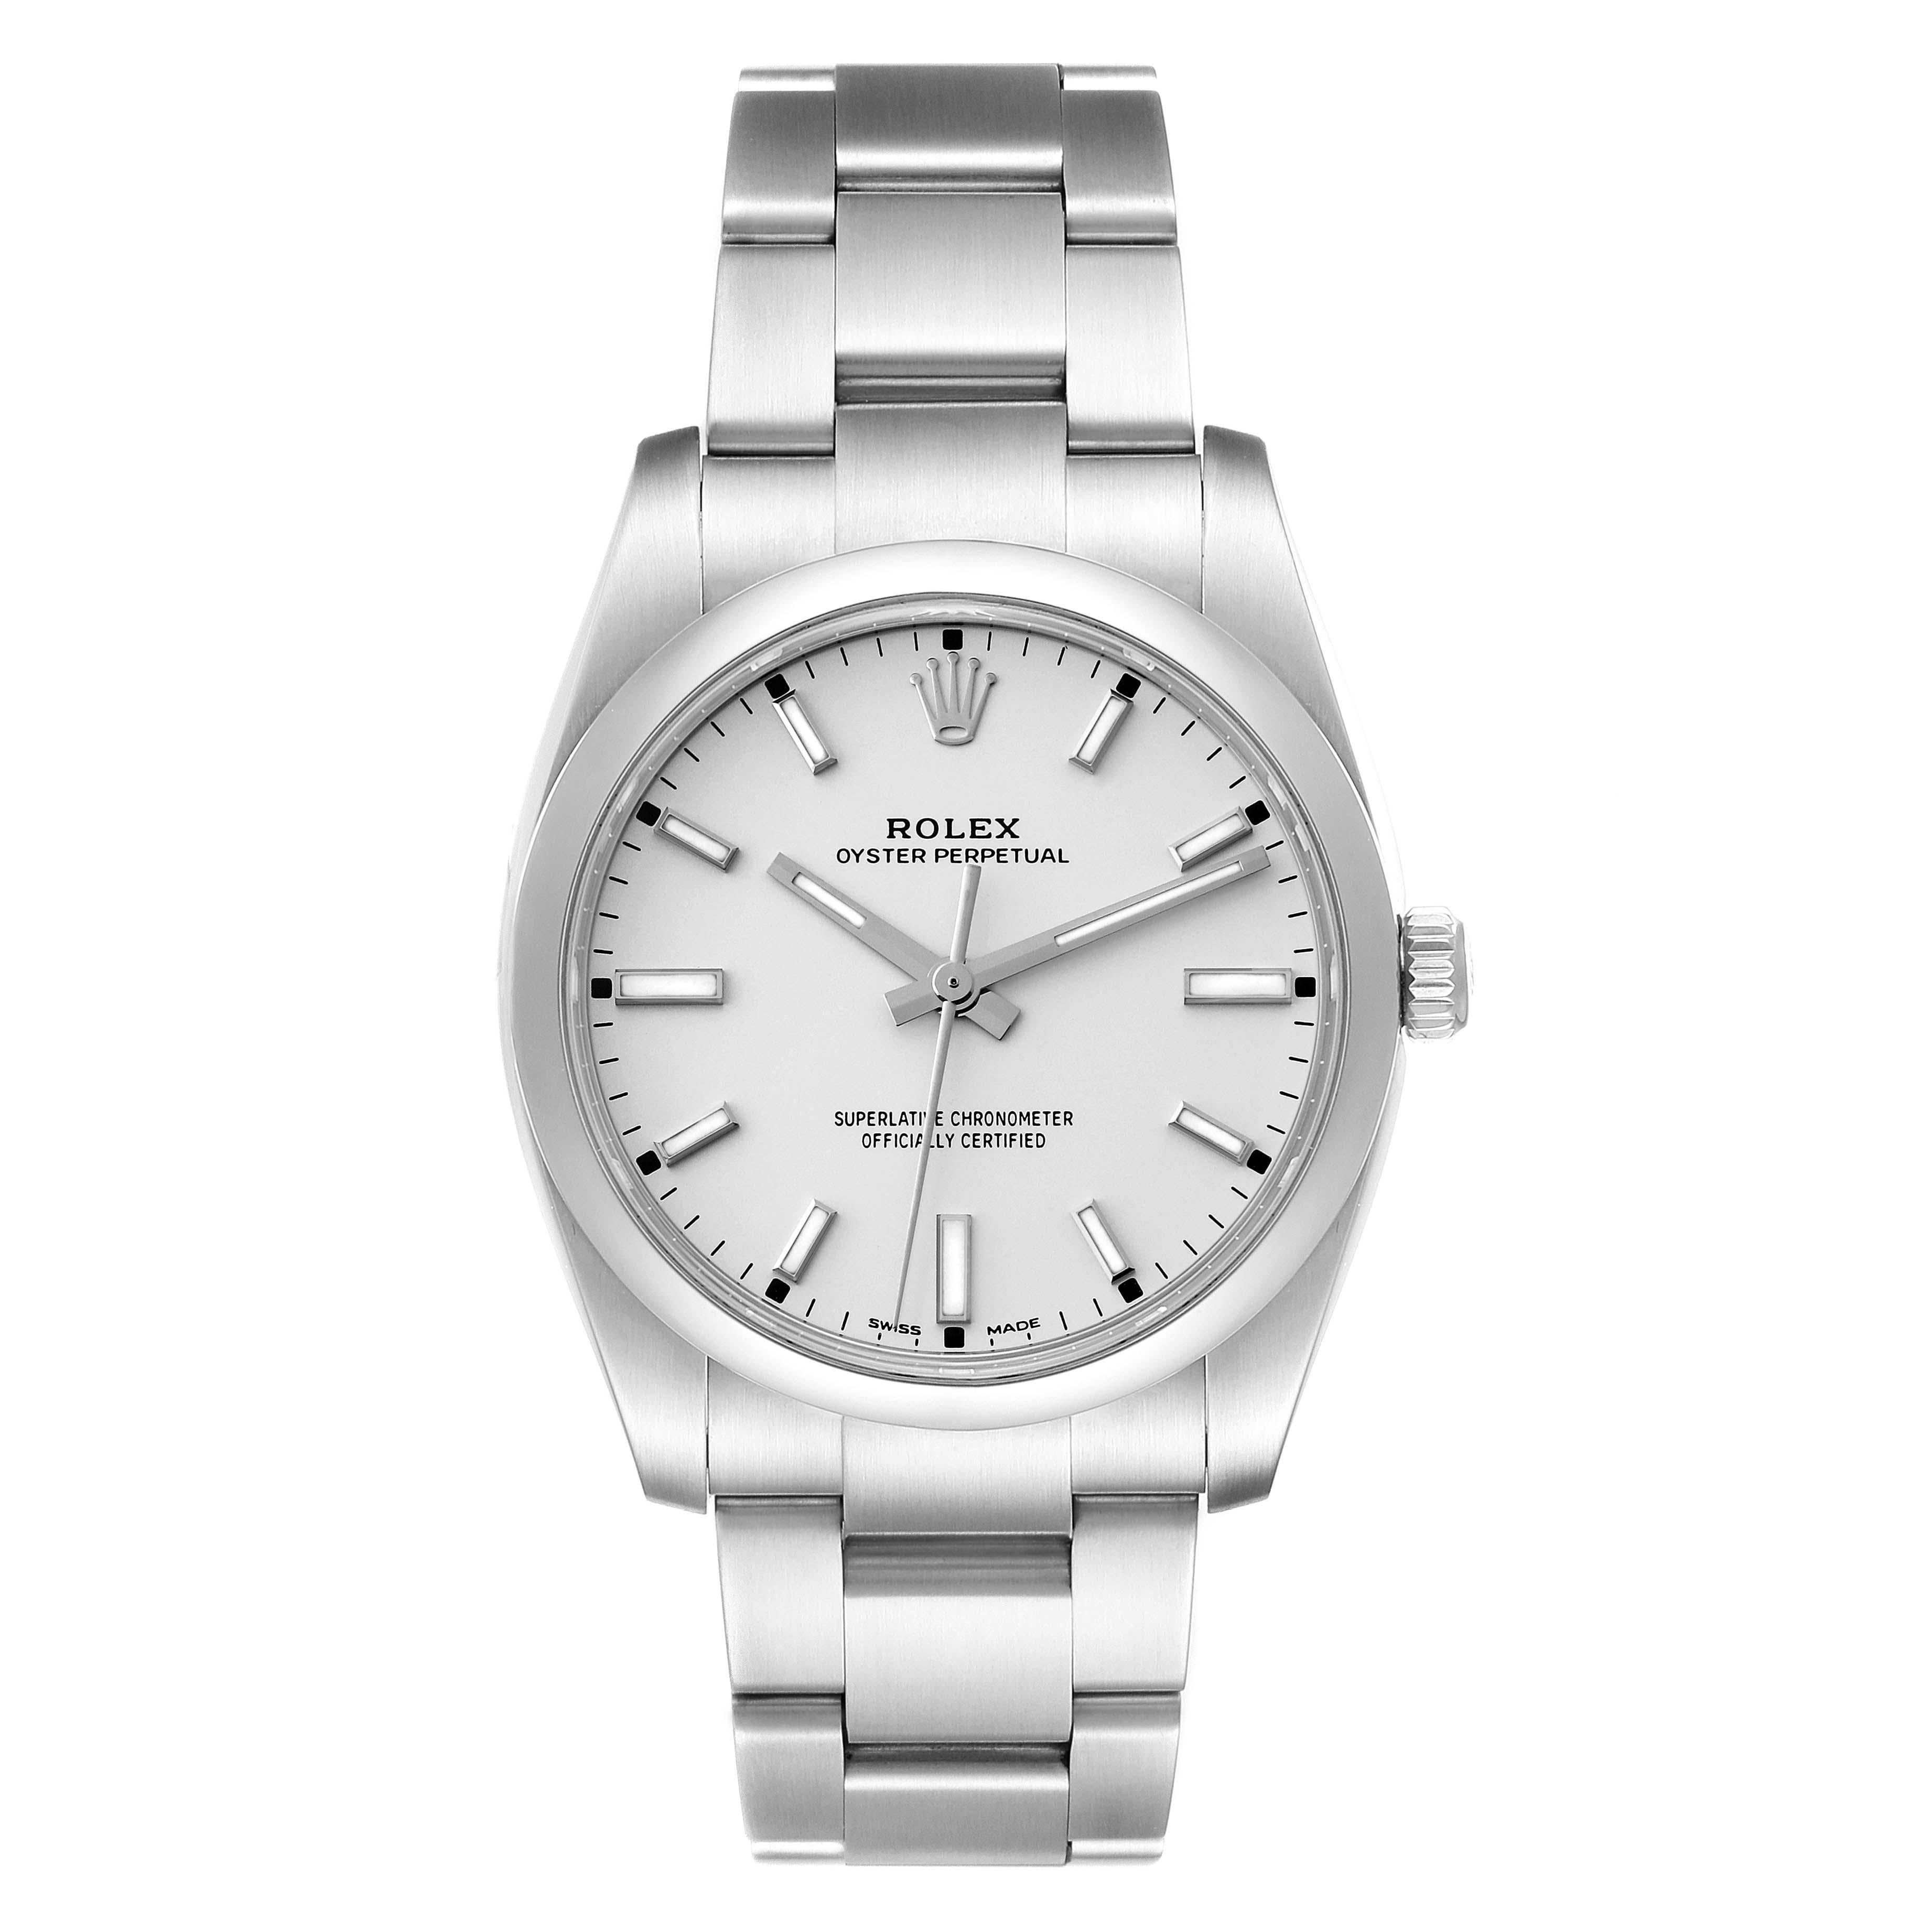 Rolex Oyster Perpetual White Dial Smooth Bezel Steel Mens Watch 114200. Officially certified chronometer self-winding movement. Stainless steel case 34 mm in diameter. Rolex logo on a crown. Stainless steel smooth domed bezel. Scratch resistant